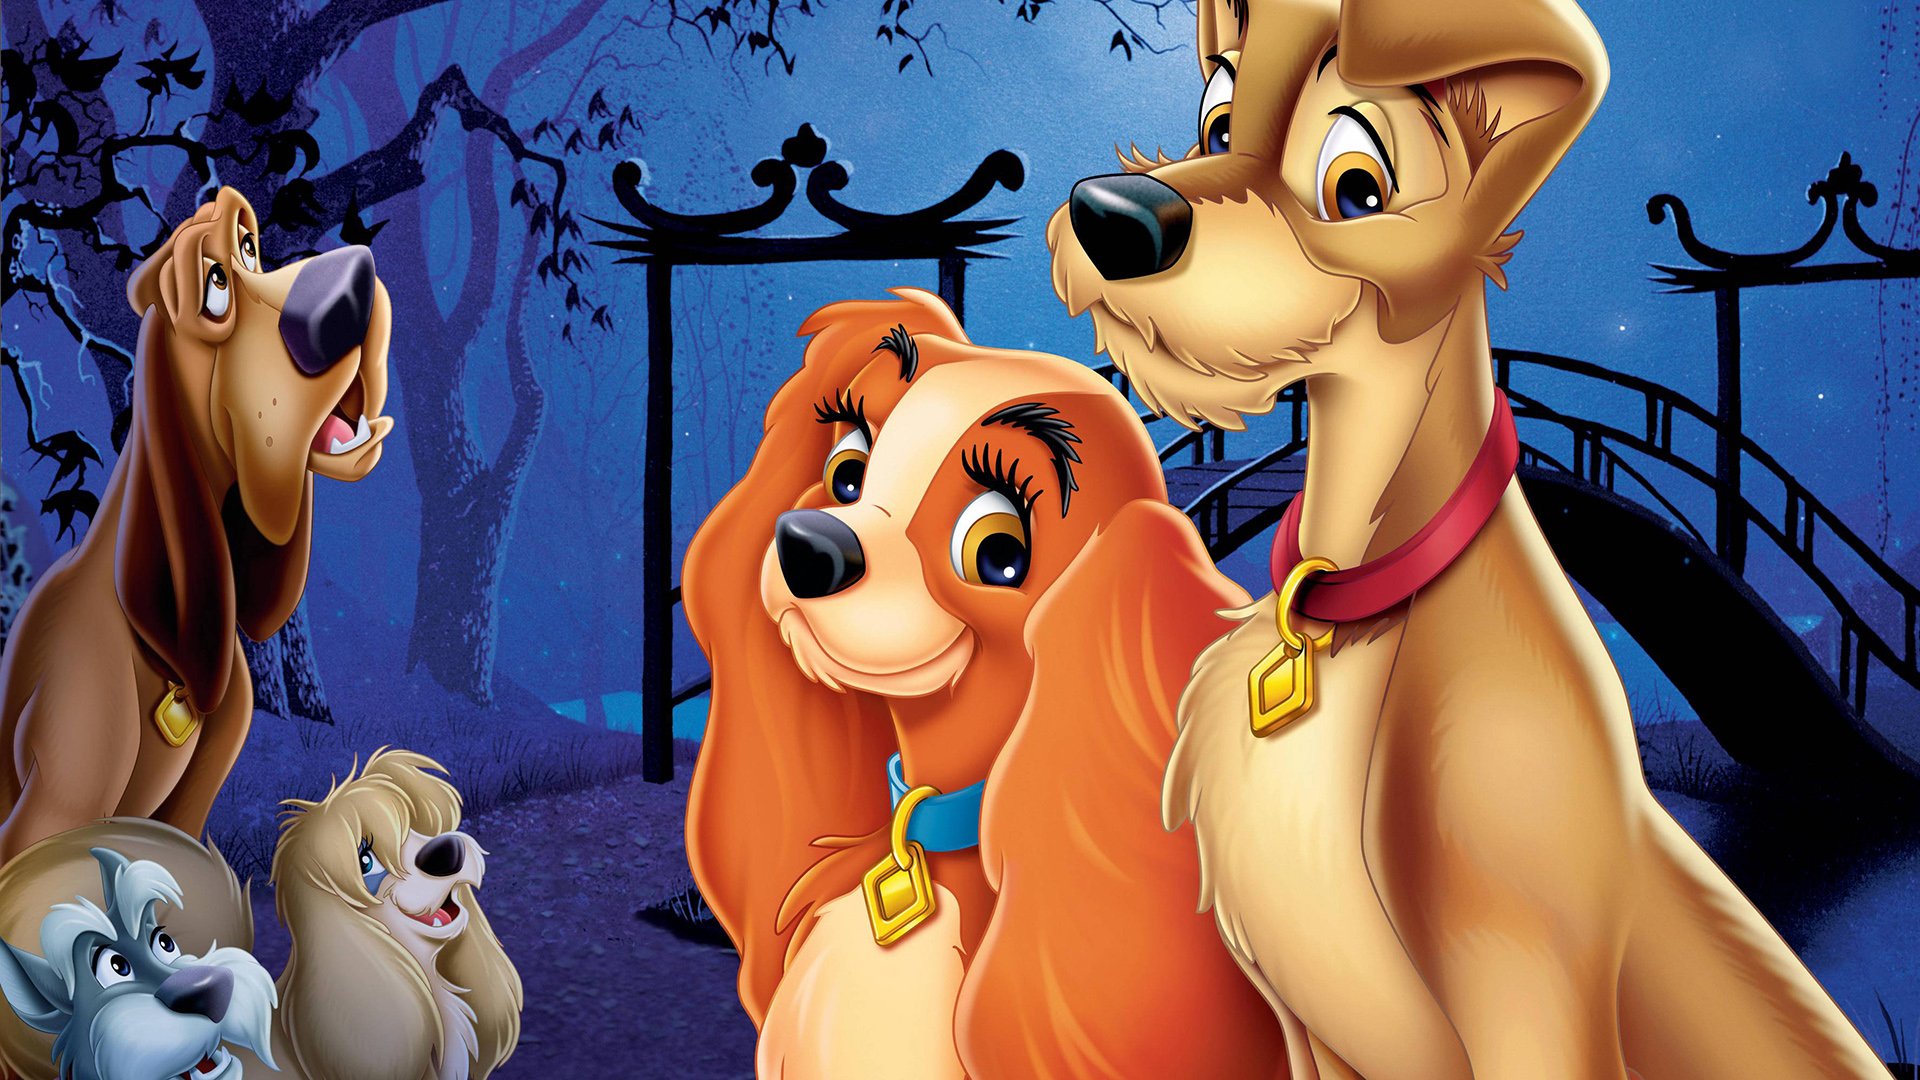 Lady And The Tramp 2019 News - HD Wallpaper 